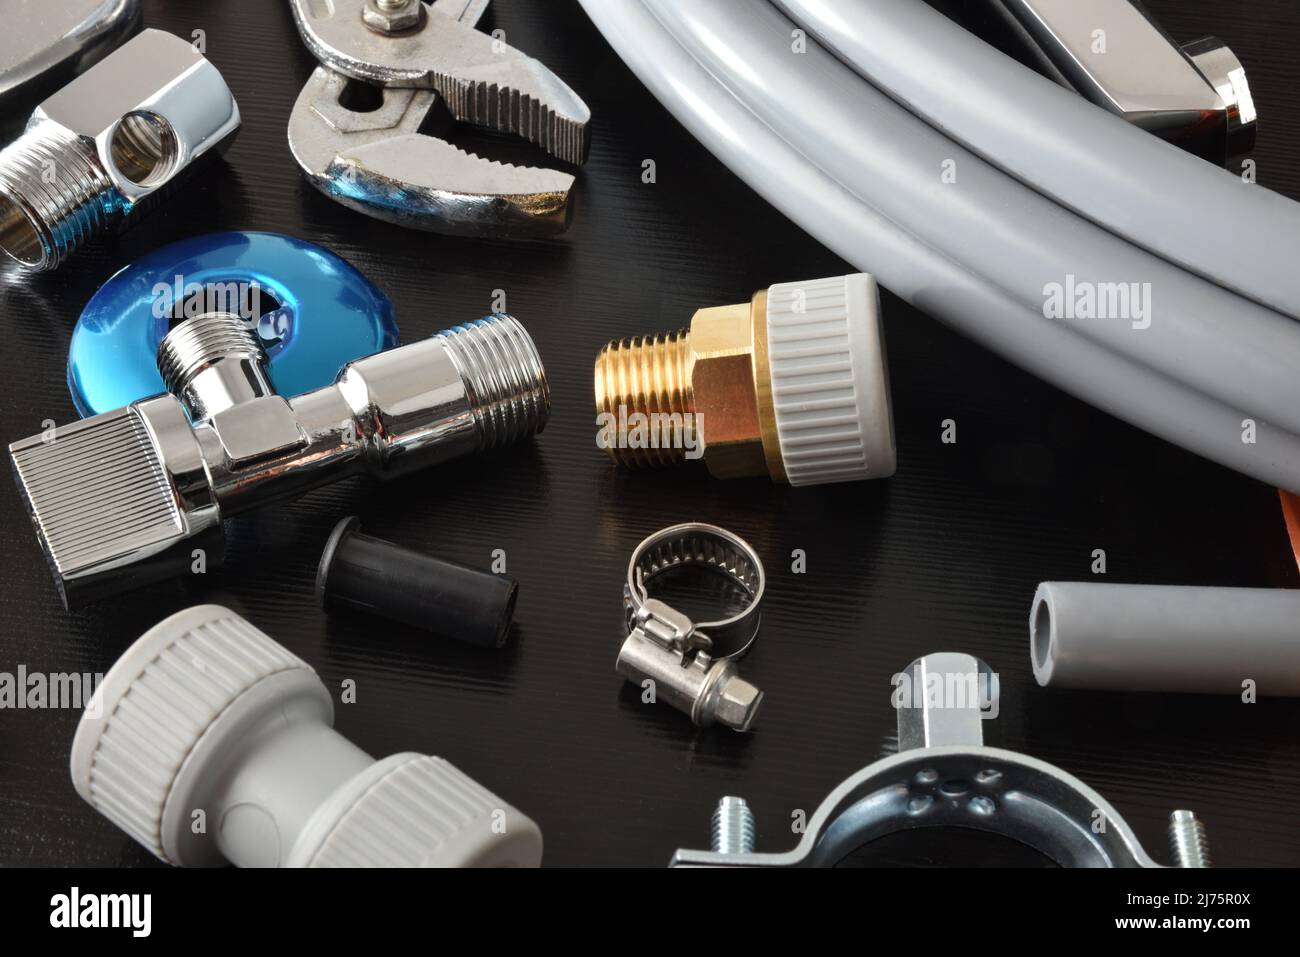 Detail of plumbing materials and tools on black workbench. Elevated view. Horizontal composition. Stock Photo